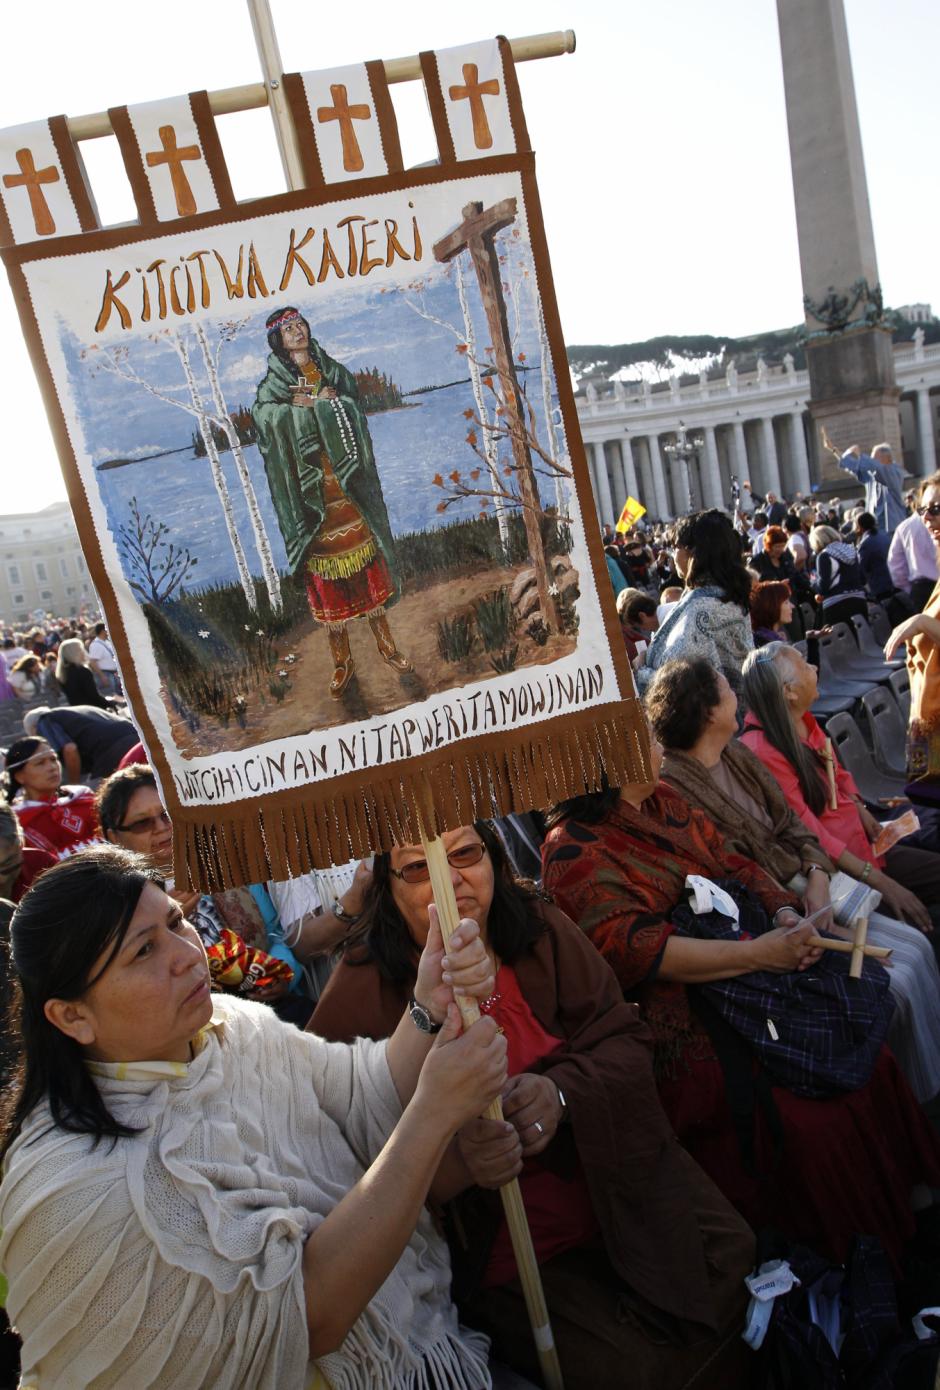 Native Indians from Quebec, Canada, hold an image of Kateri Tekakwitha, the first American Indian to achieve sainthood, as they wait for the start of a canonization ceremony celebrated in  the Vatican, Sunday, Oct. 21, 2012